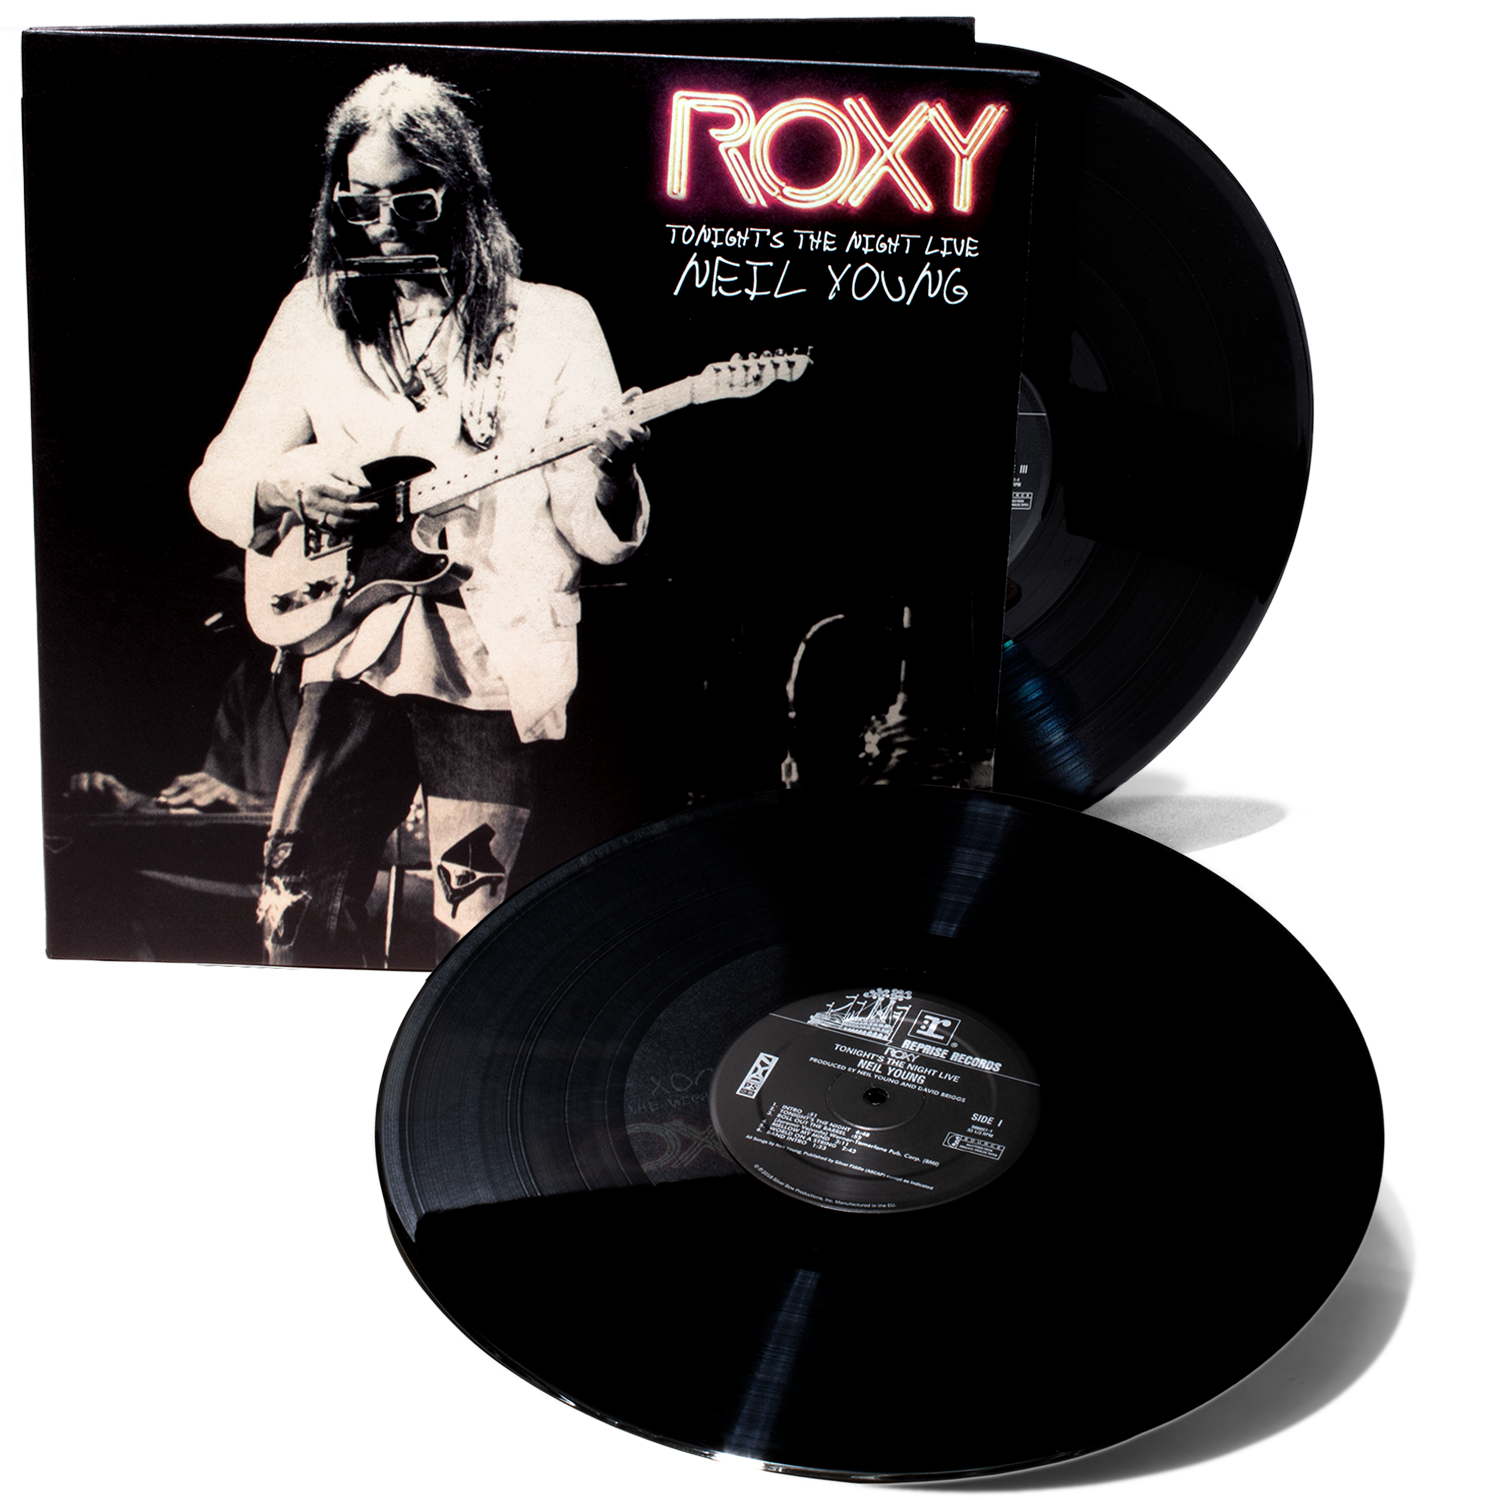 ROXY: Tonights the Night Live LP + Hi Res | Young US Official Store